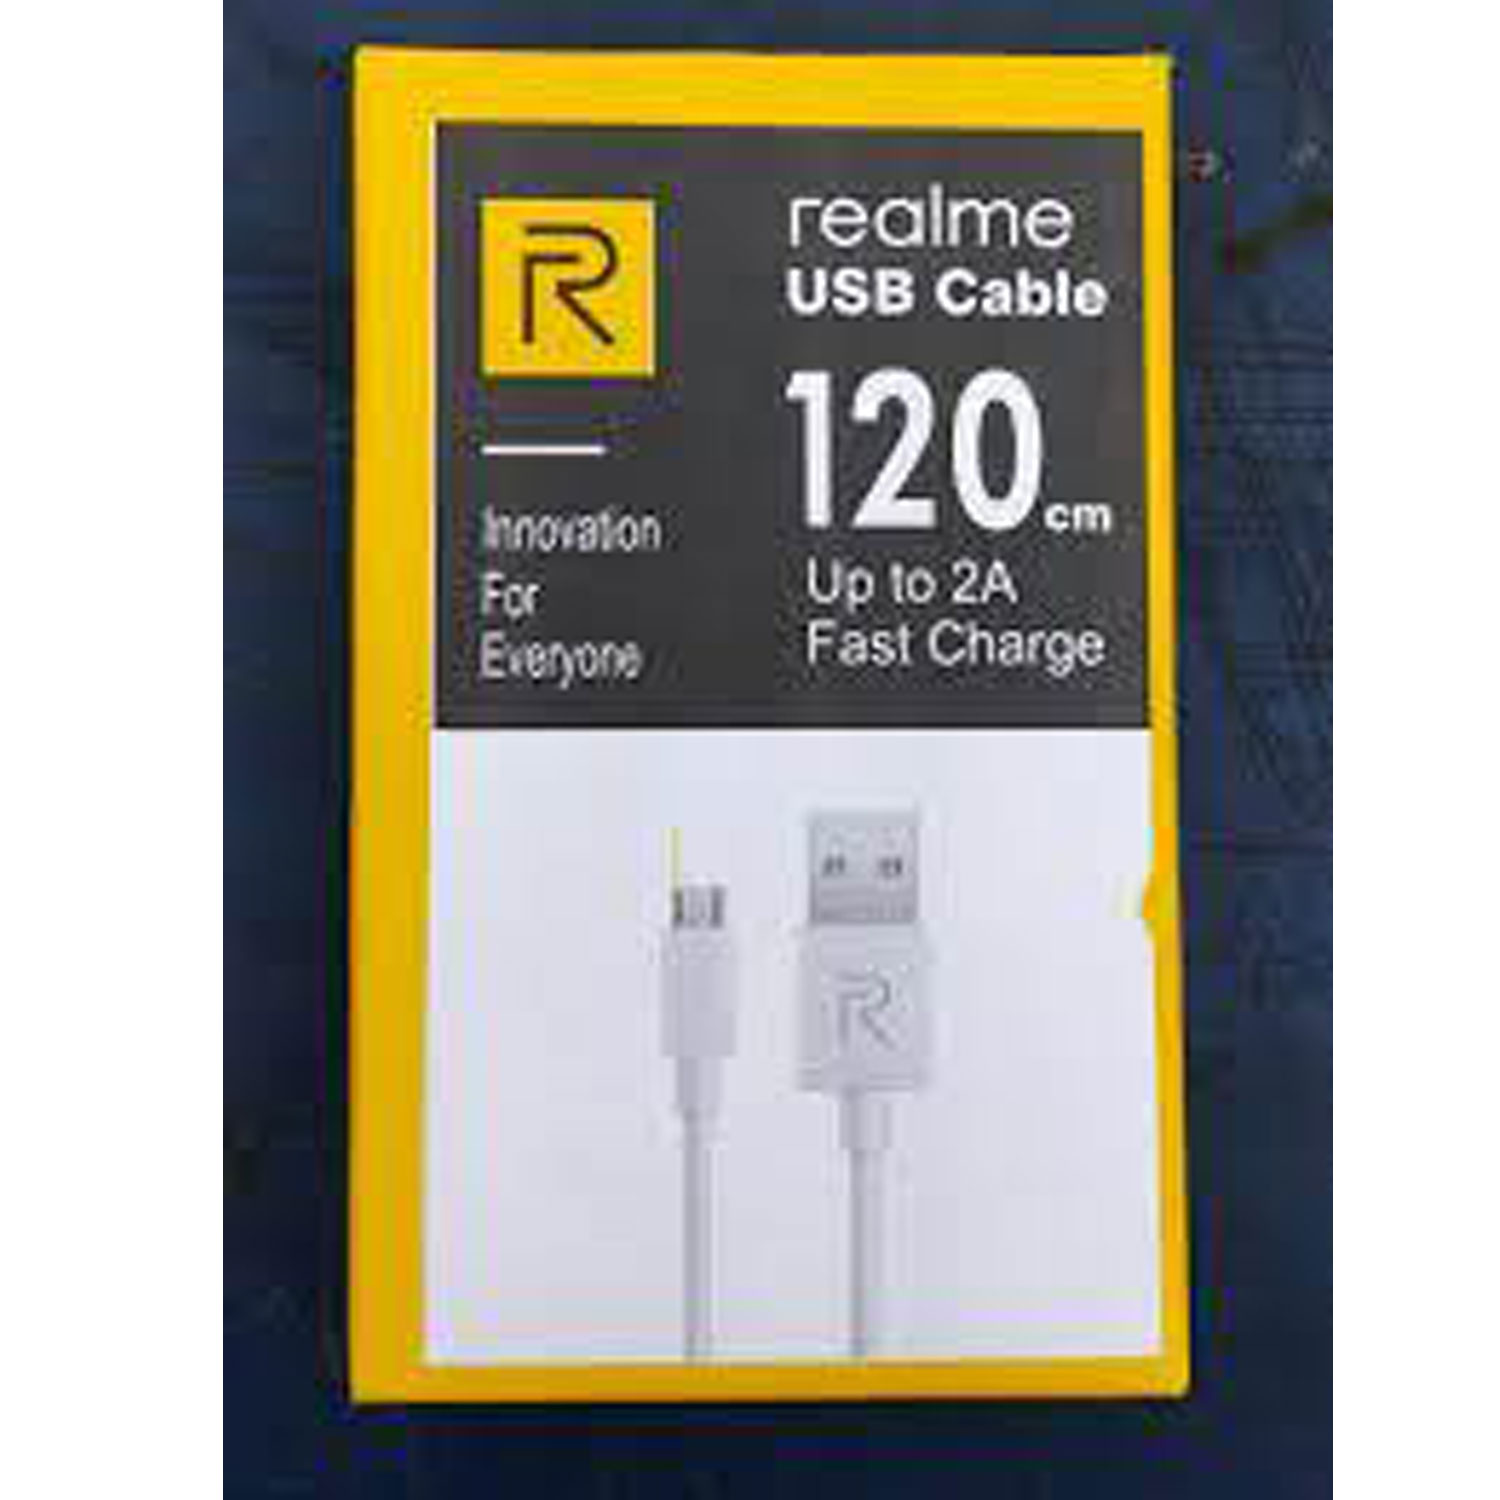 USB Cable for Realme V-8 Data Cable | Sync Quick Fast Charging Cable | Charger Cable |Pack of 10